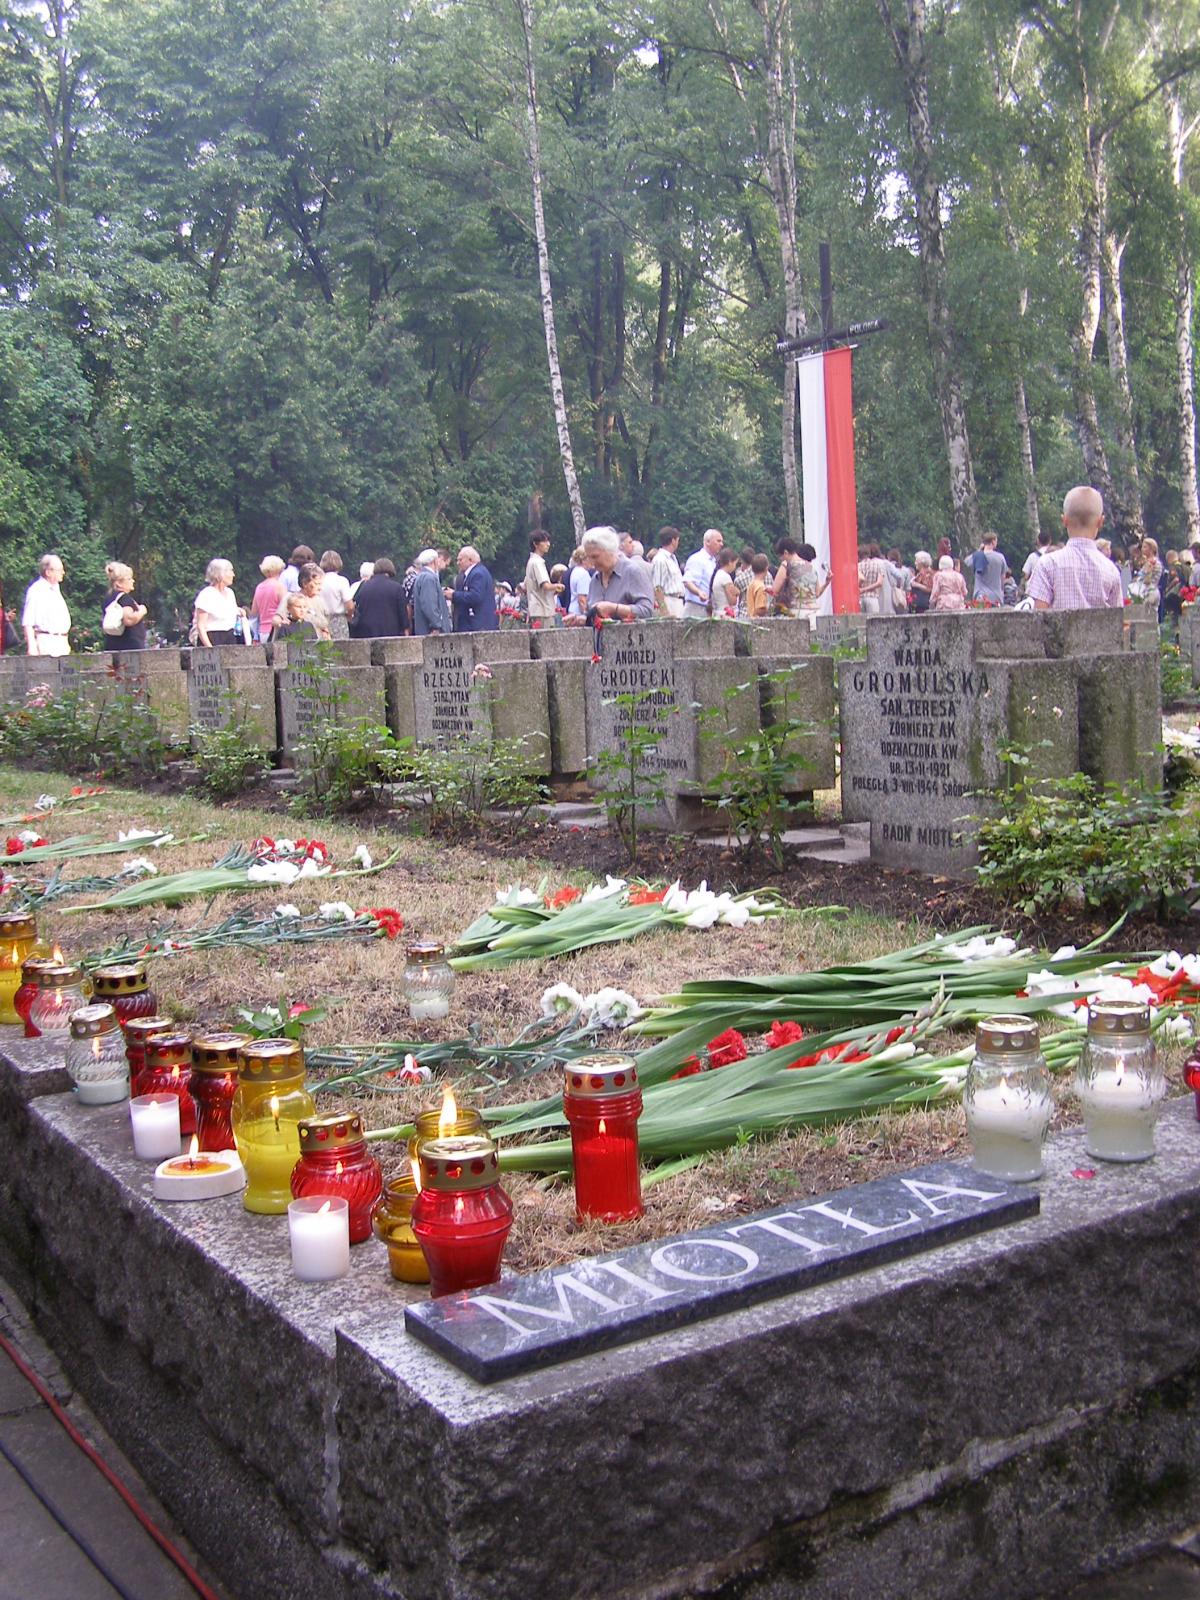 Wikipedia, Files with no machine-readable source, Military Cemetery in Warsaw, Miotła Battalion, Pho